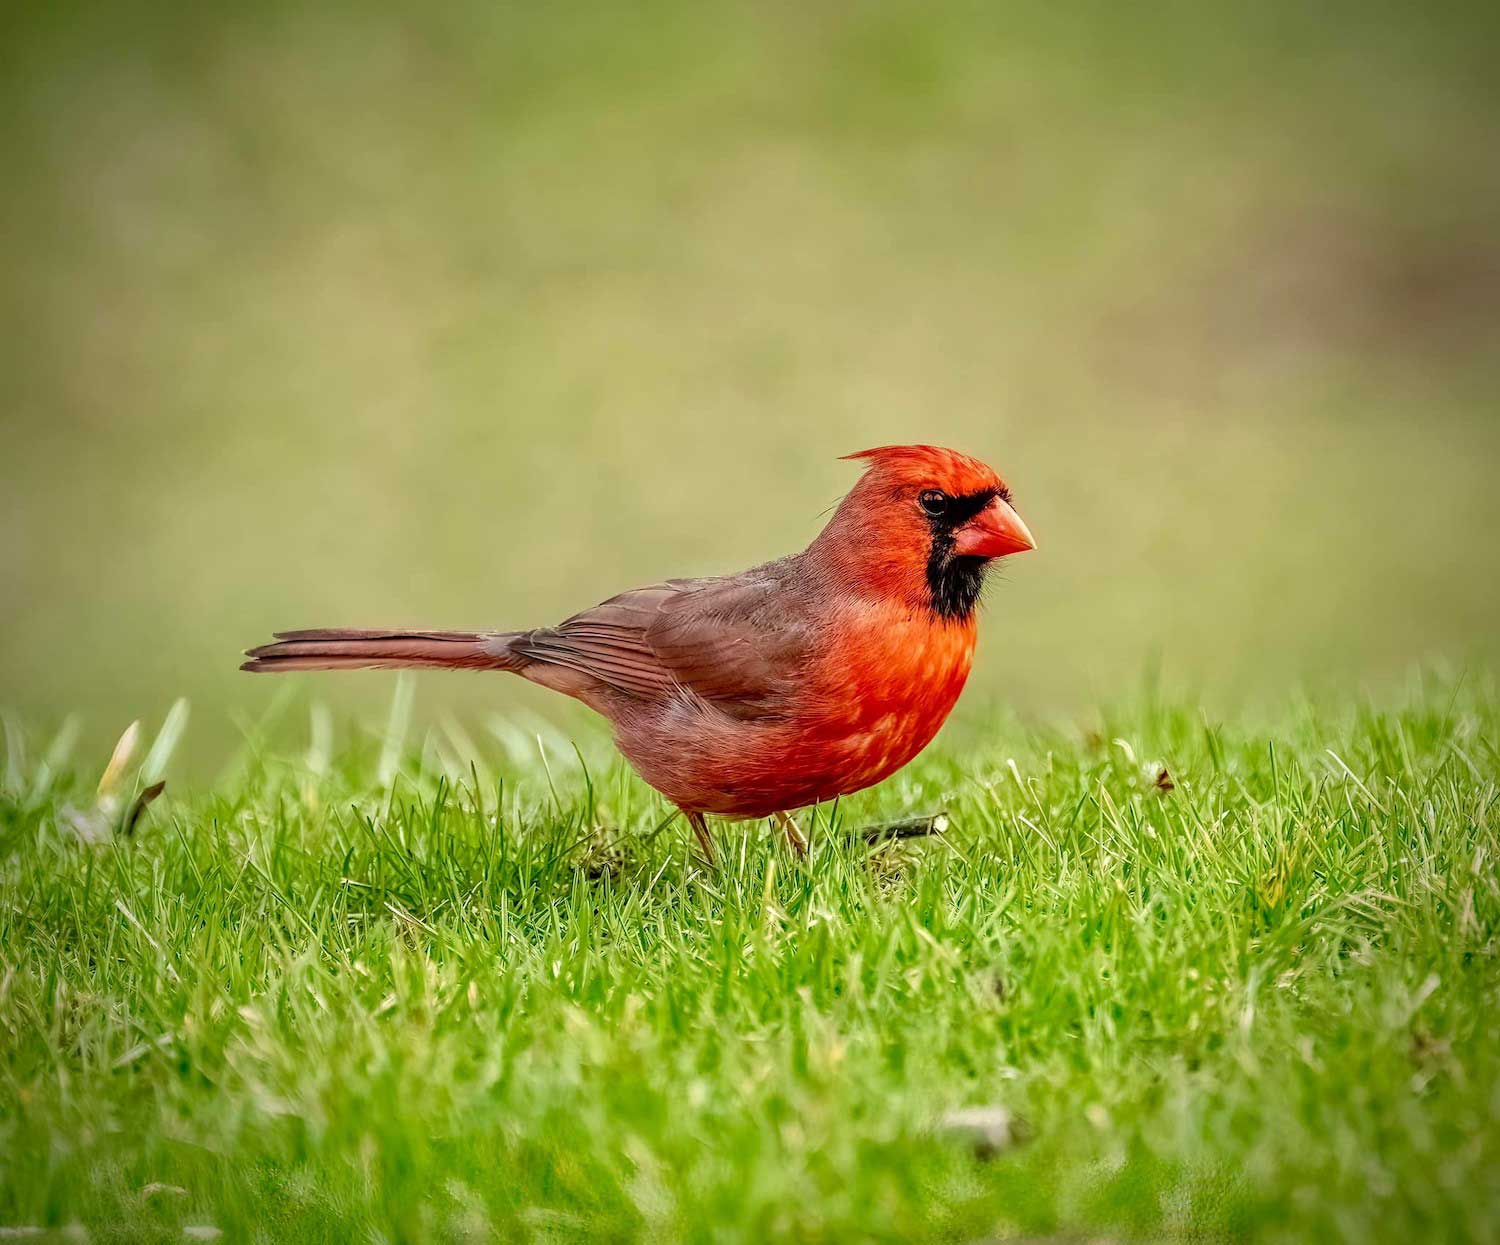 A male northern cardinal standing in grass.